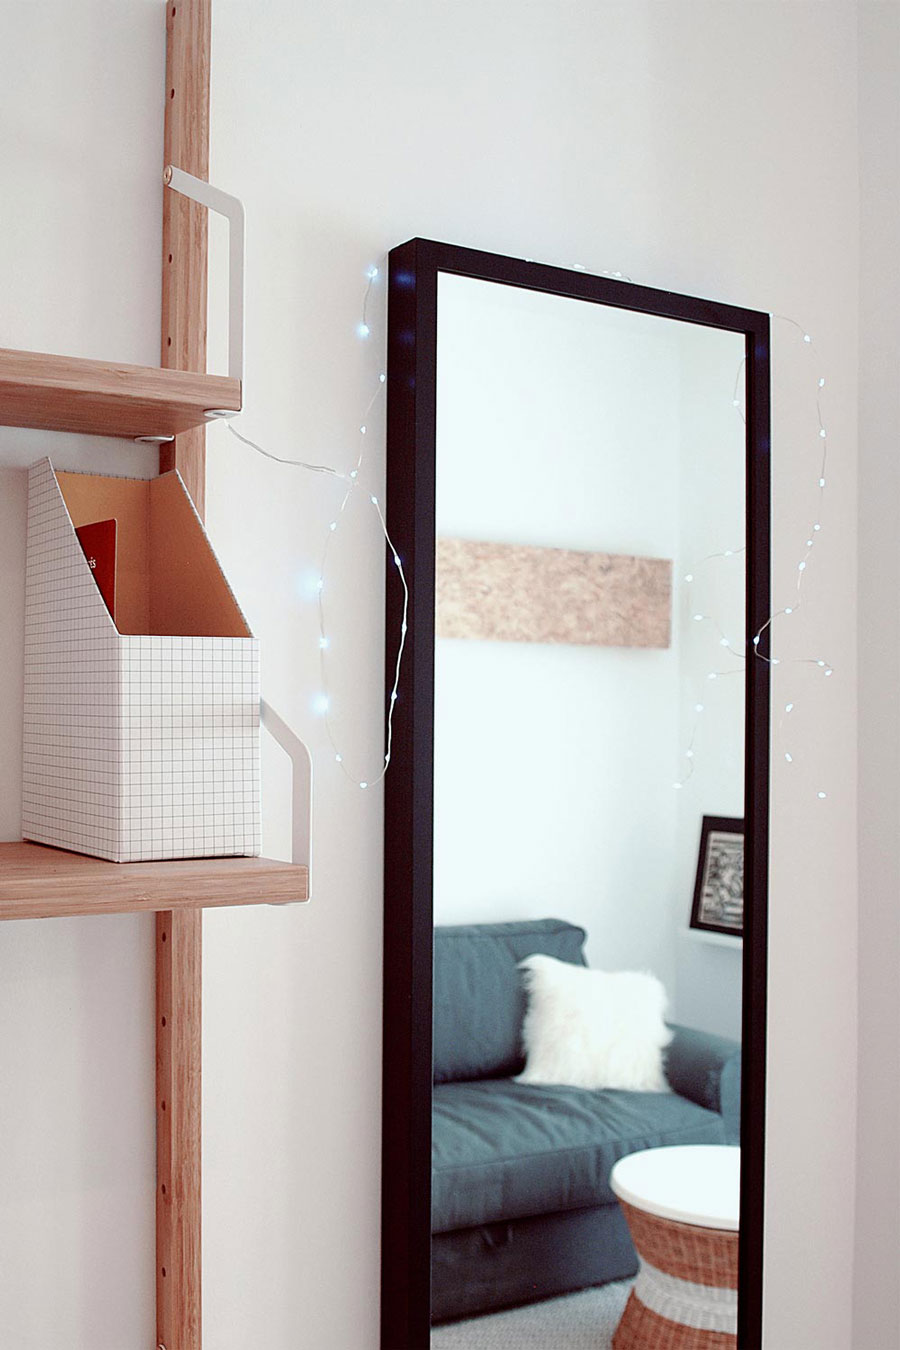 Interior detail of an IKEA mirror and shelves